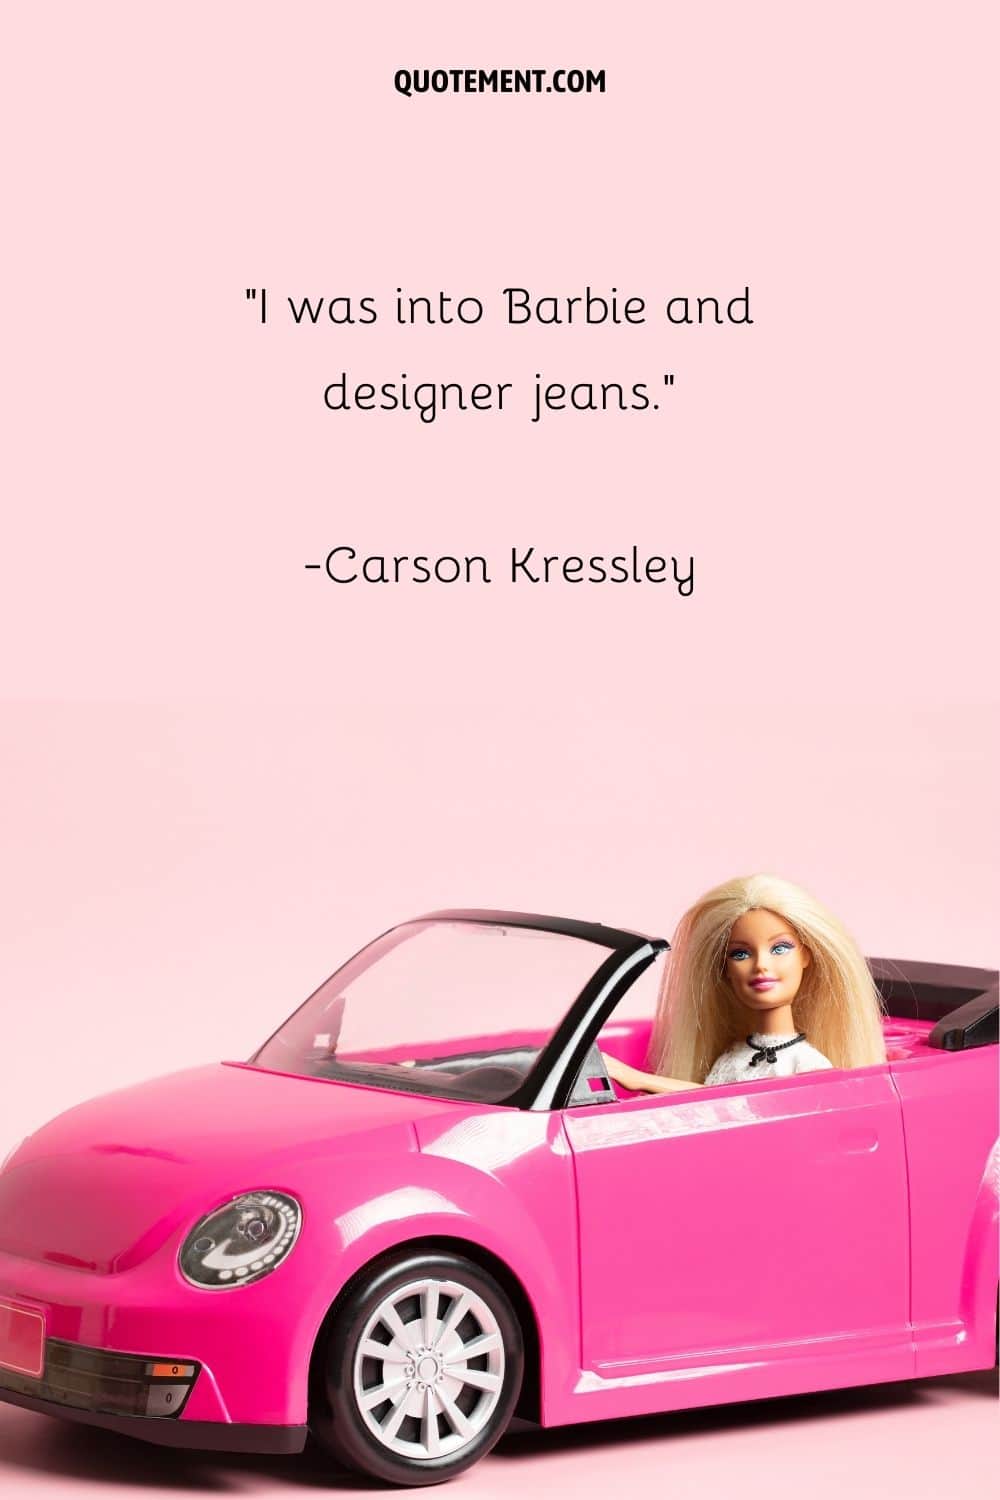 I was into Barbie and designer jeans